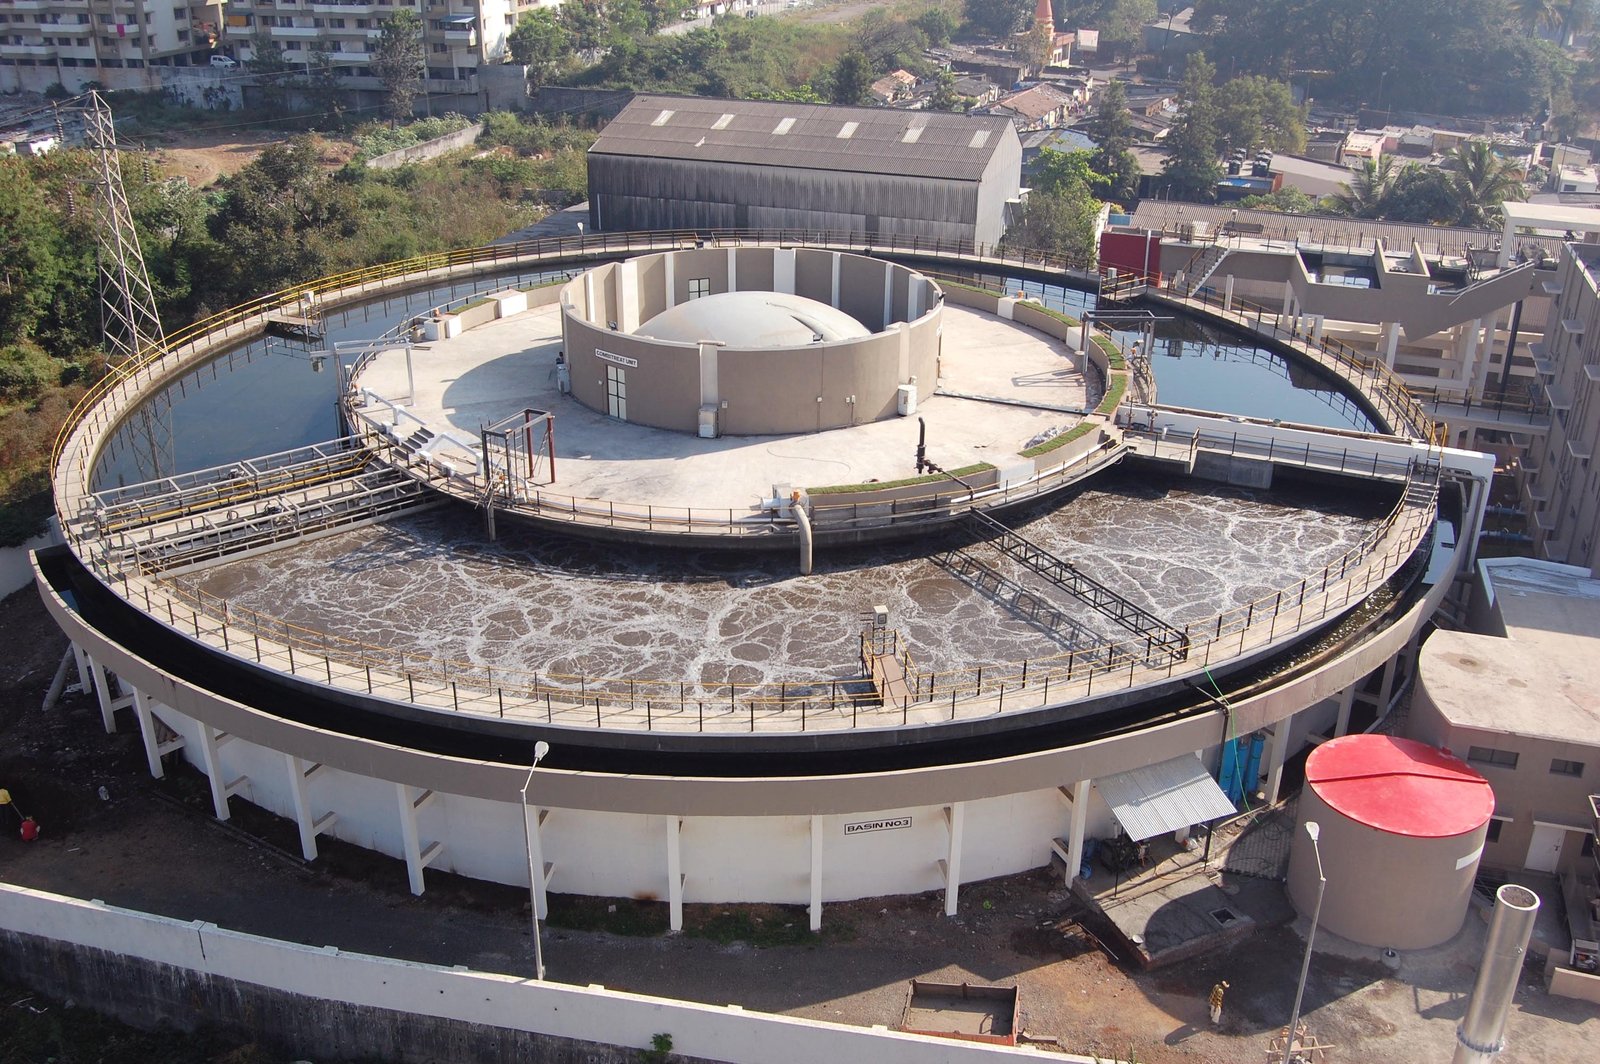 Combitreat-ISBR sewage treatment technology by HNB Engineers, a part of IFAT India 2013, a trade fair focusing on water, sewage, refuse and recycling which will premiere between October 24 and 26, 2013 , at the Bombay Convention and Exhibition Centre (BCE